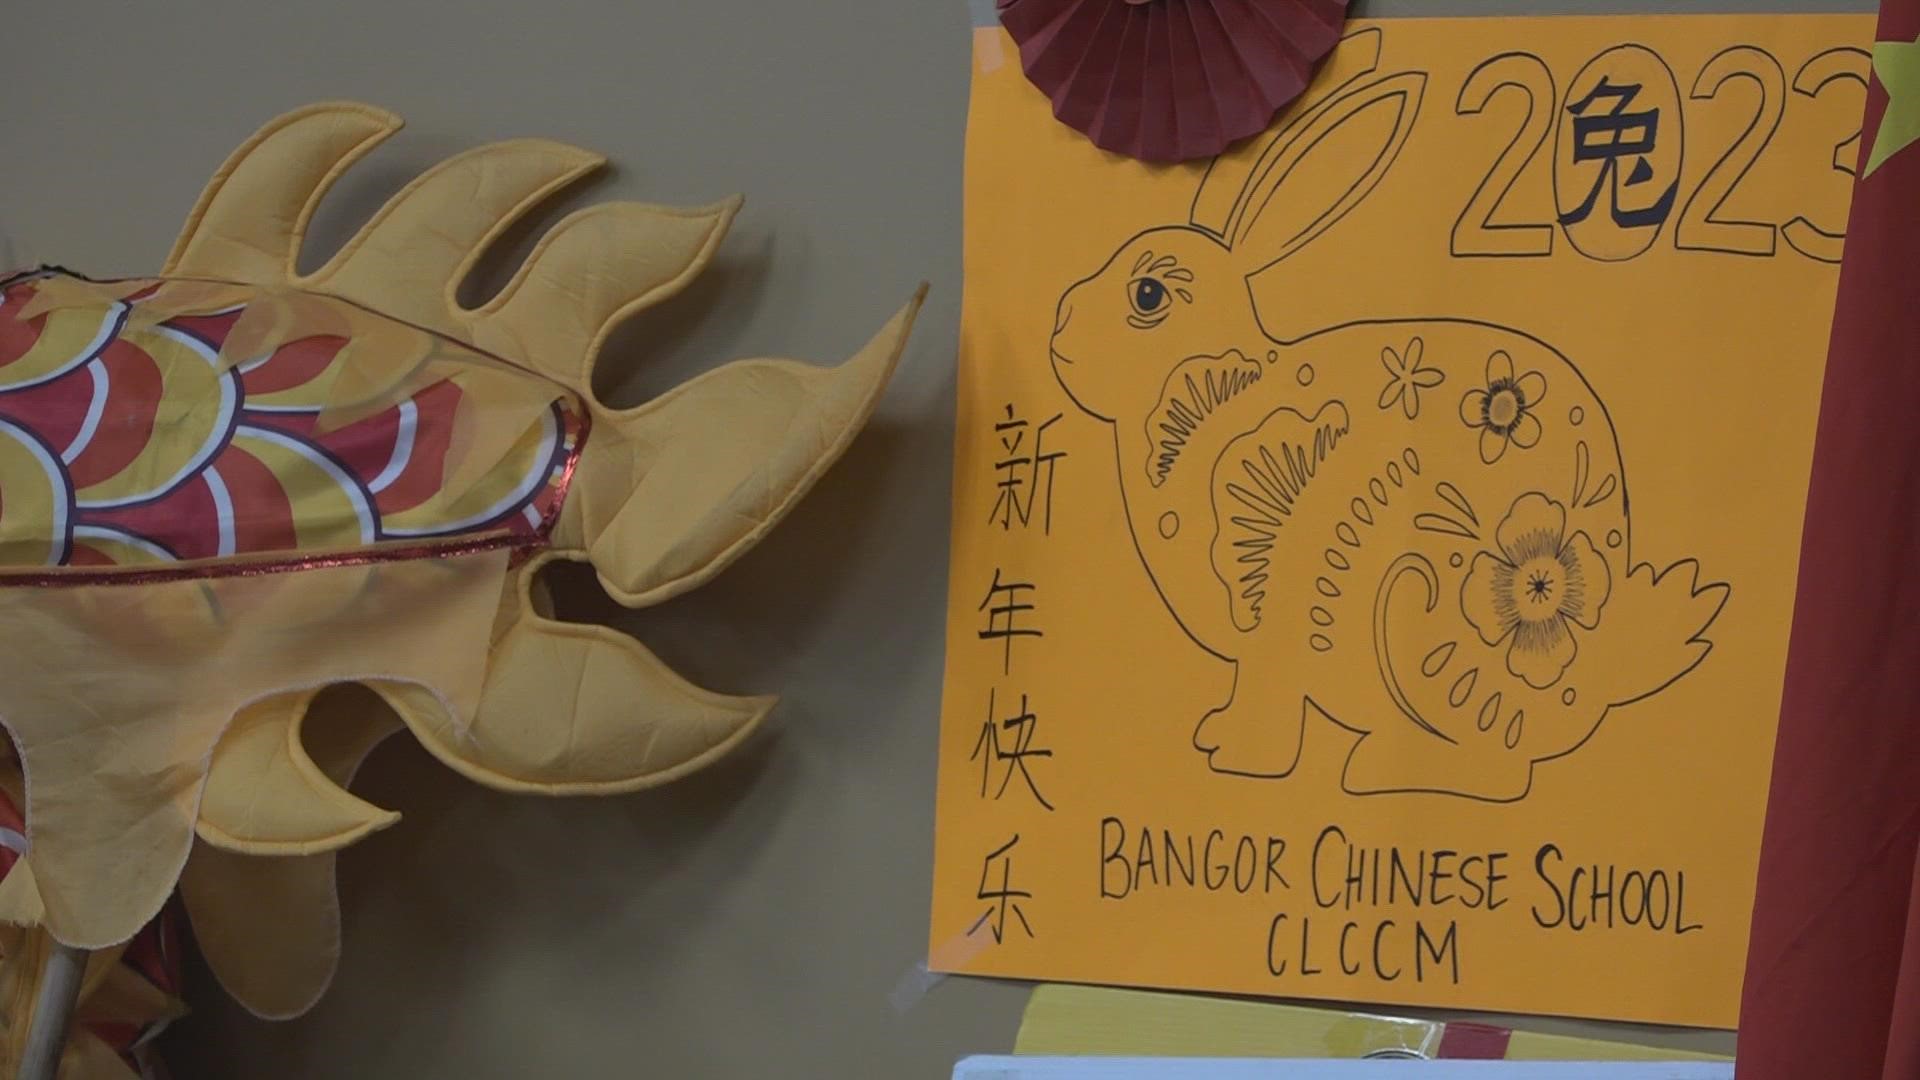 The year of the rabbit symbolizes peace, happiness, and health, according to the school's president.